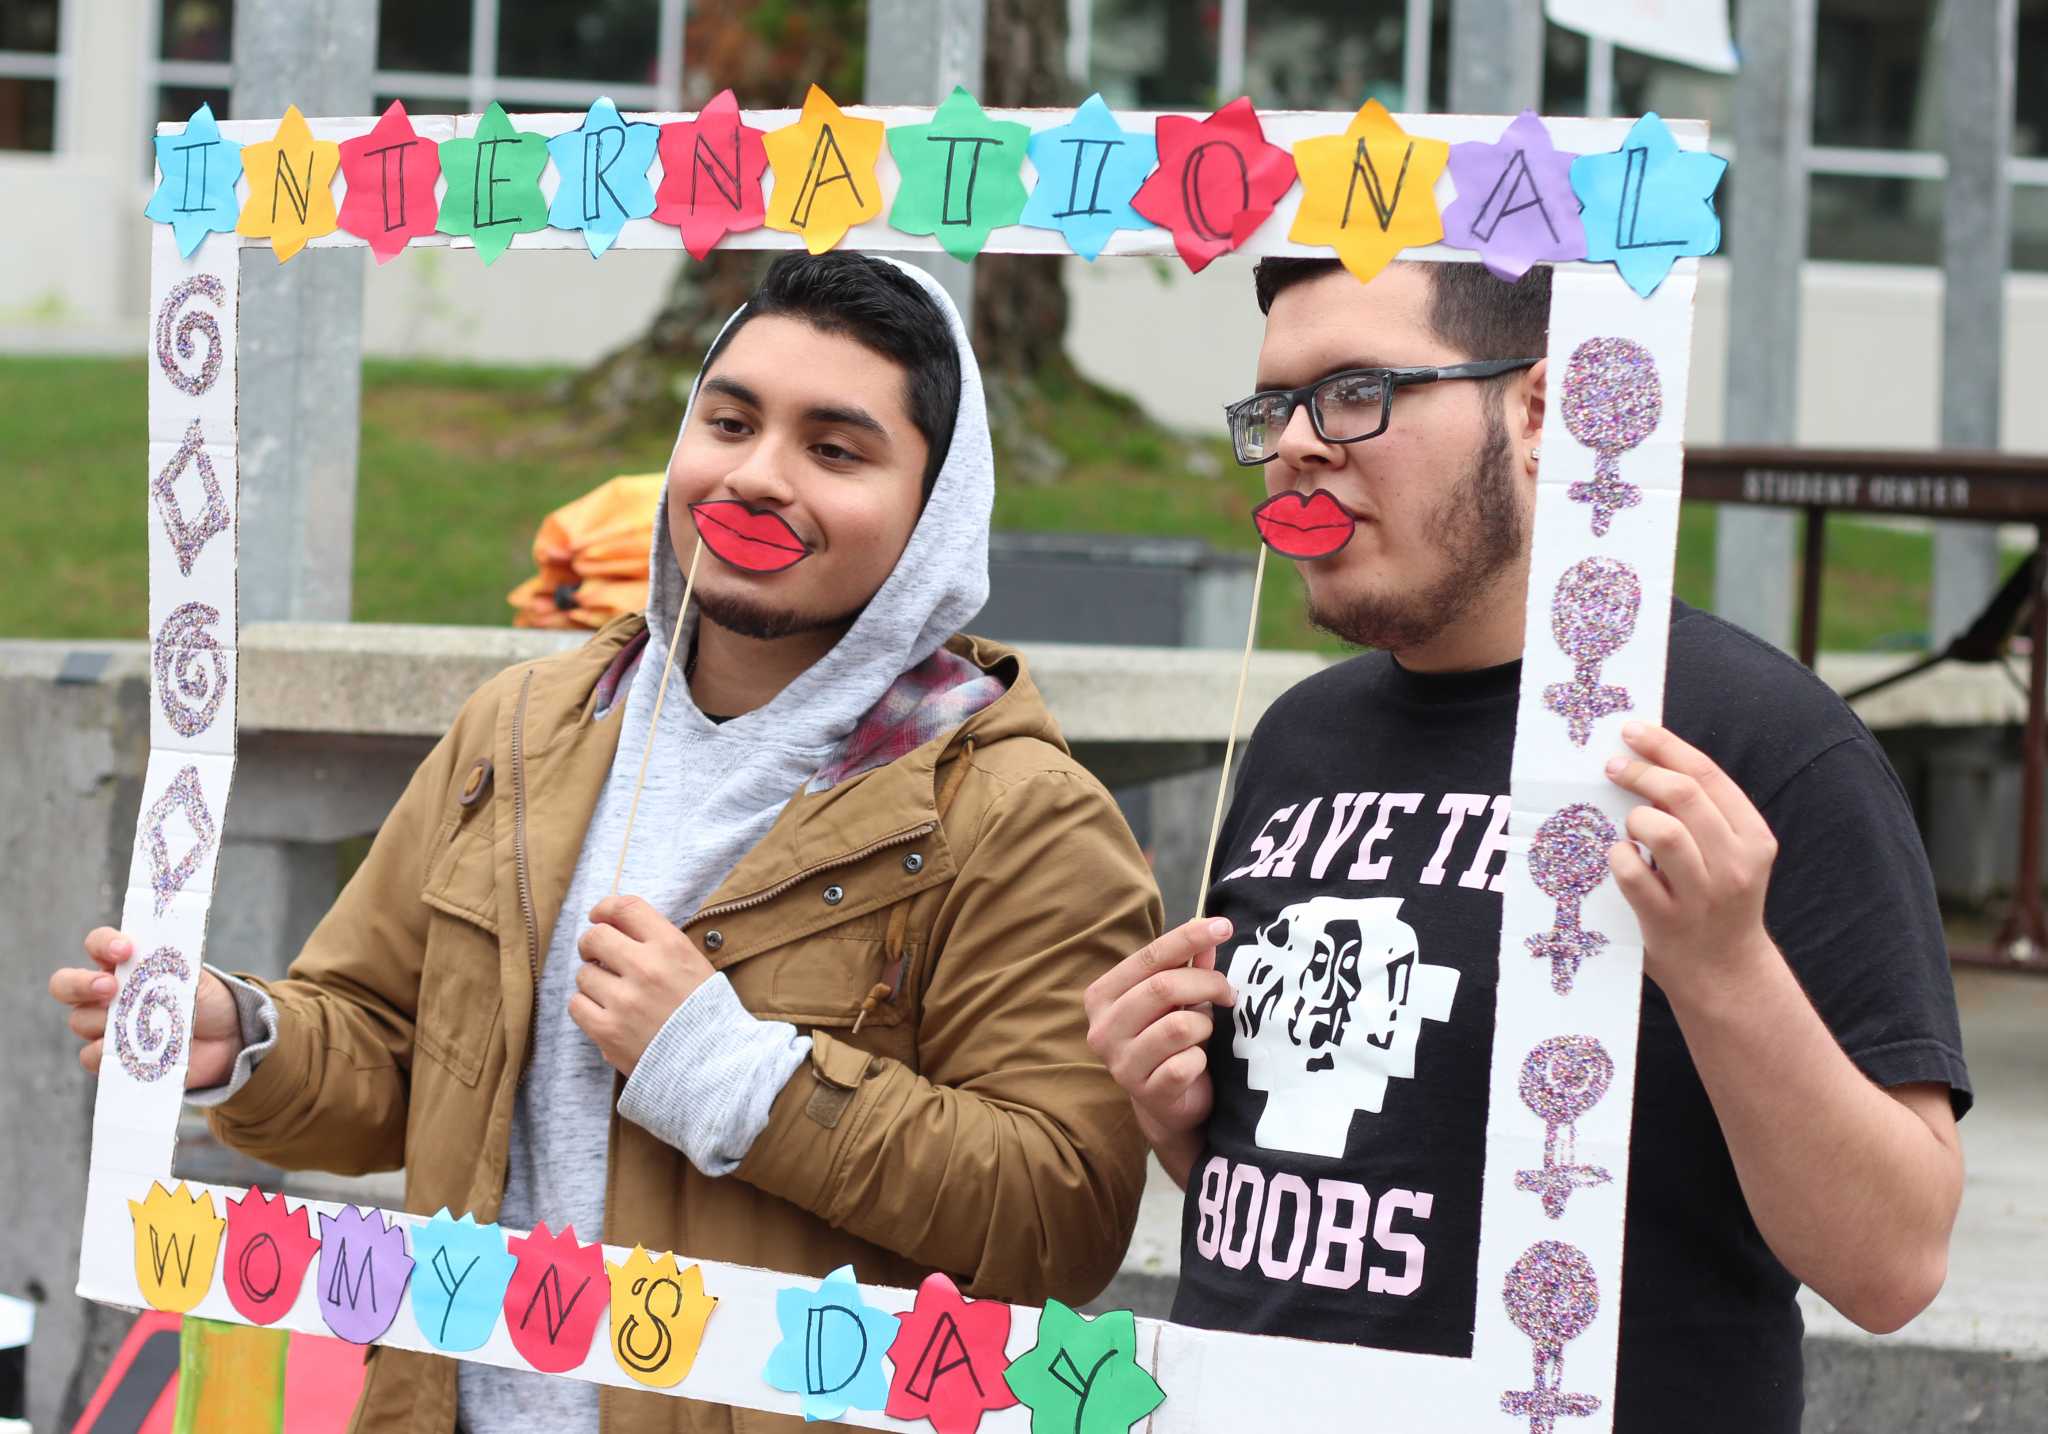 ohn Rivera, (left) marketing major, and Arturo Gomez (right) hospitality major, coordinators from La Raza, promote International Womens Day during an event held in Malcolm X Plaza in which students performed spoken word and poems, and multiple campus organizations did tabling and provided games for students to play, Tuesday, Mar. 8, 2016. (Alex Kofman / Xpress)